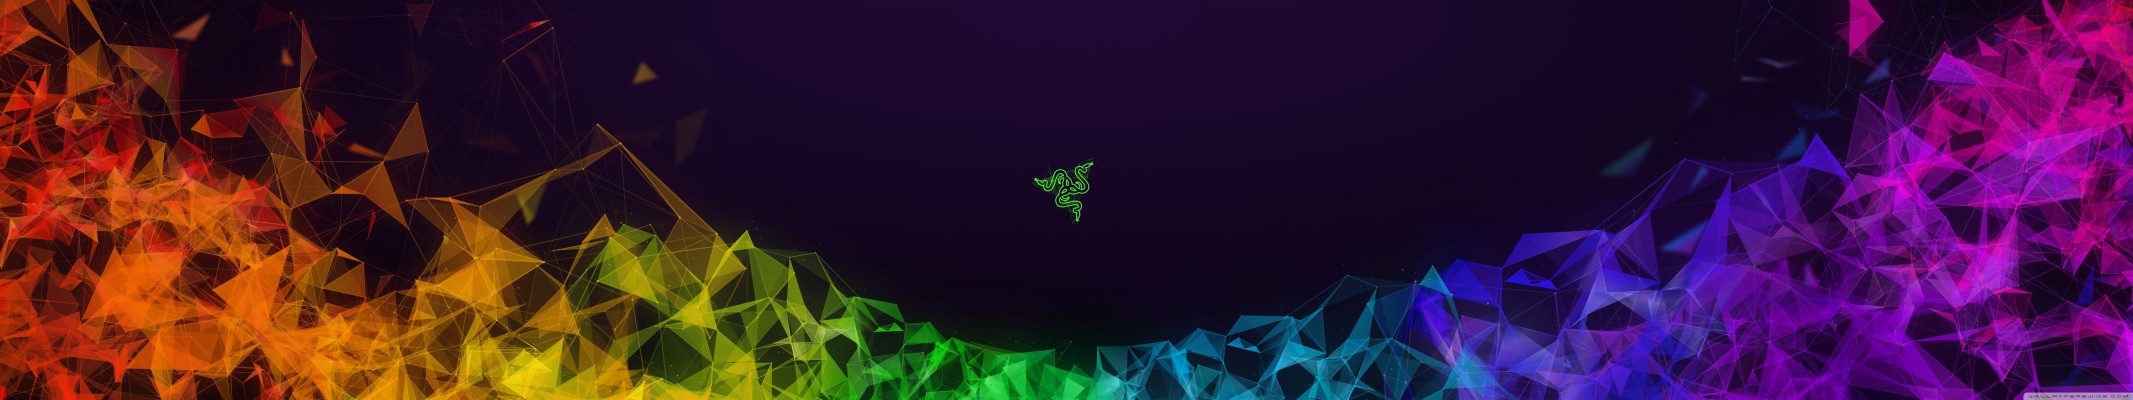 Download Razer Wallpapers And Backgrounds Page 3 Teahub Io